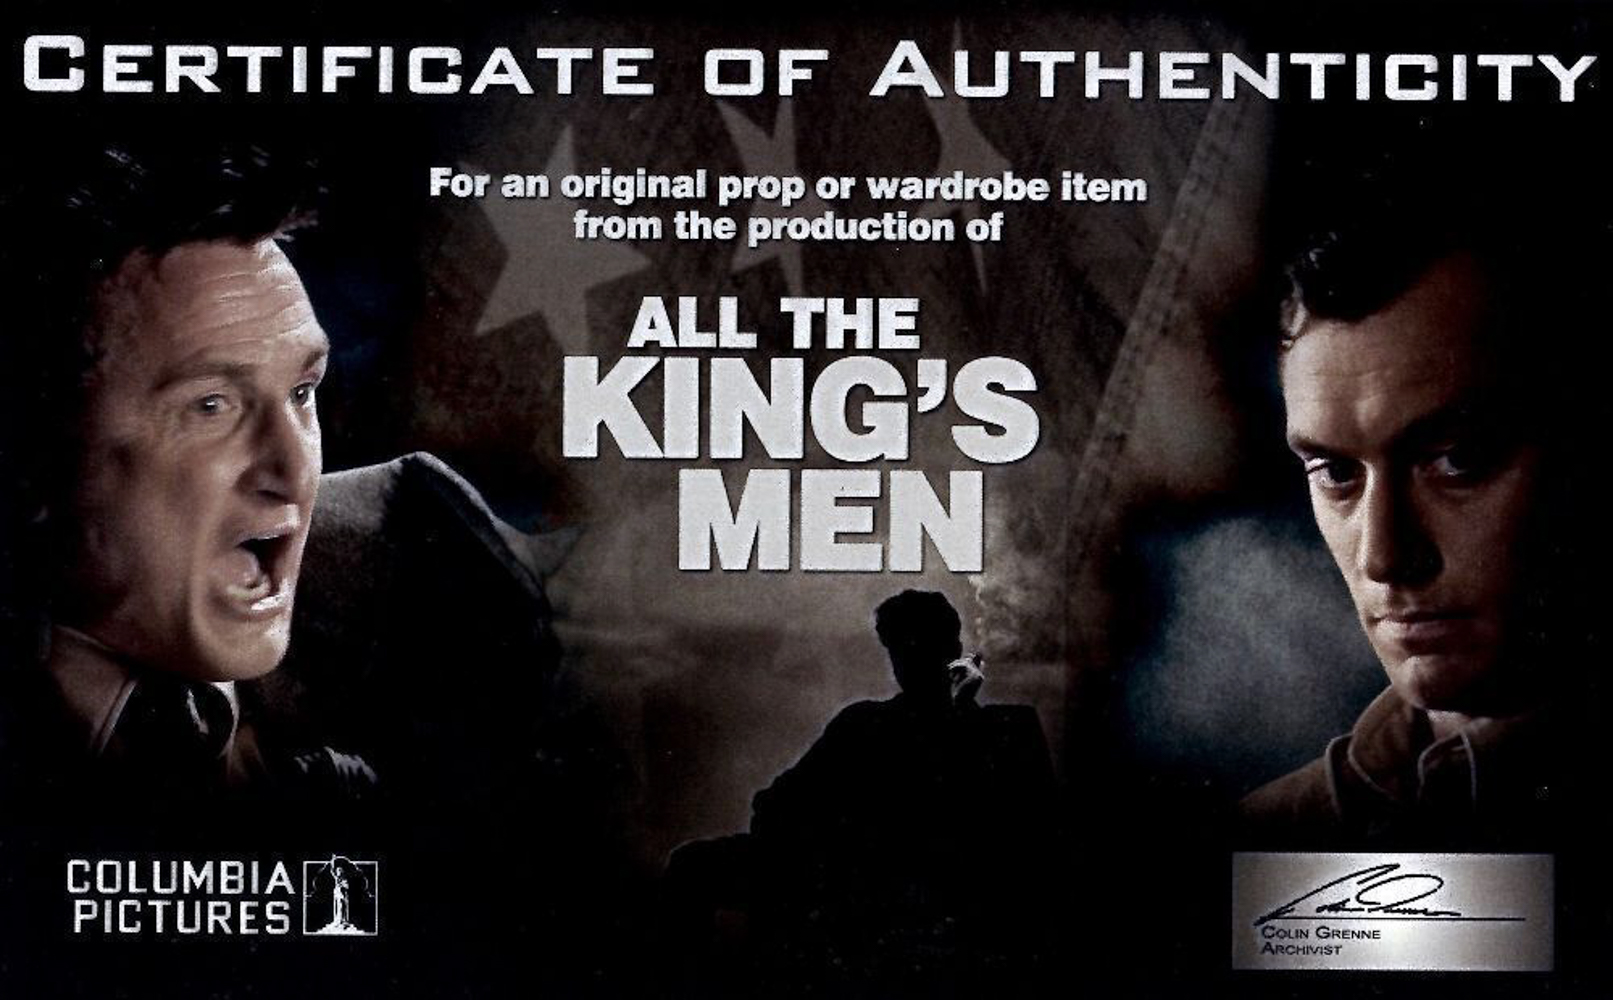 ALL THE KING'S MEN | SEAN PENN "WILLIE STARK" BLOODY FAT SUIT - Image 4 of 4